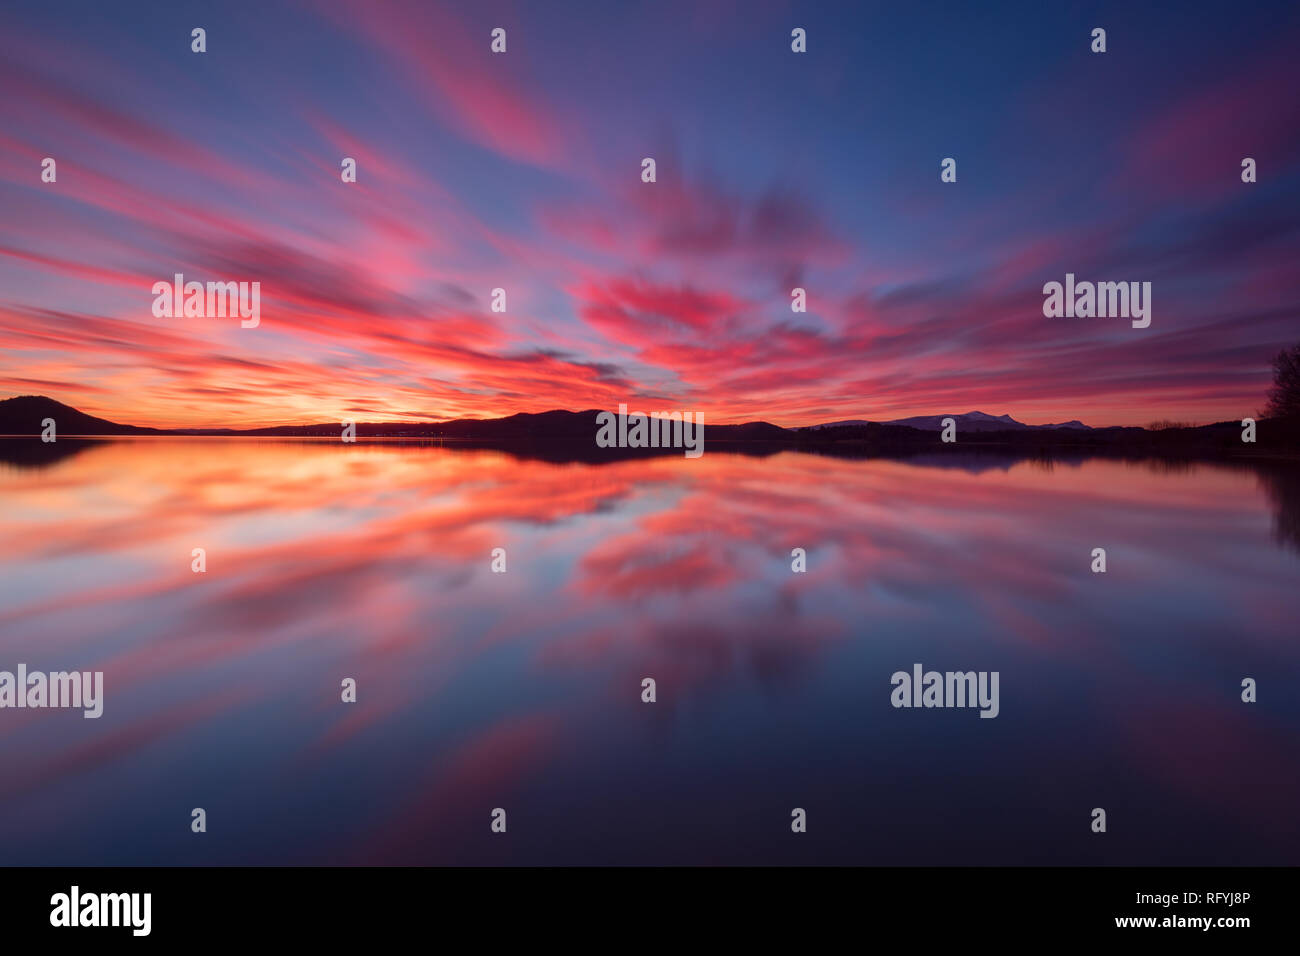 Colorful sunset reflected in a lake at Vitoria, Spain Stock Photo